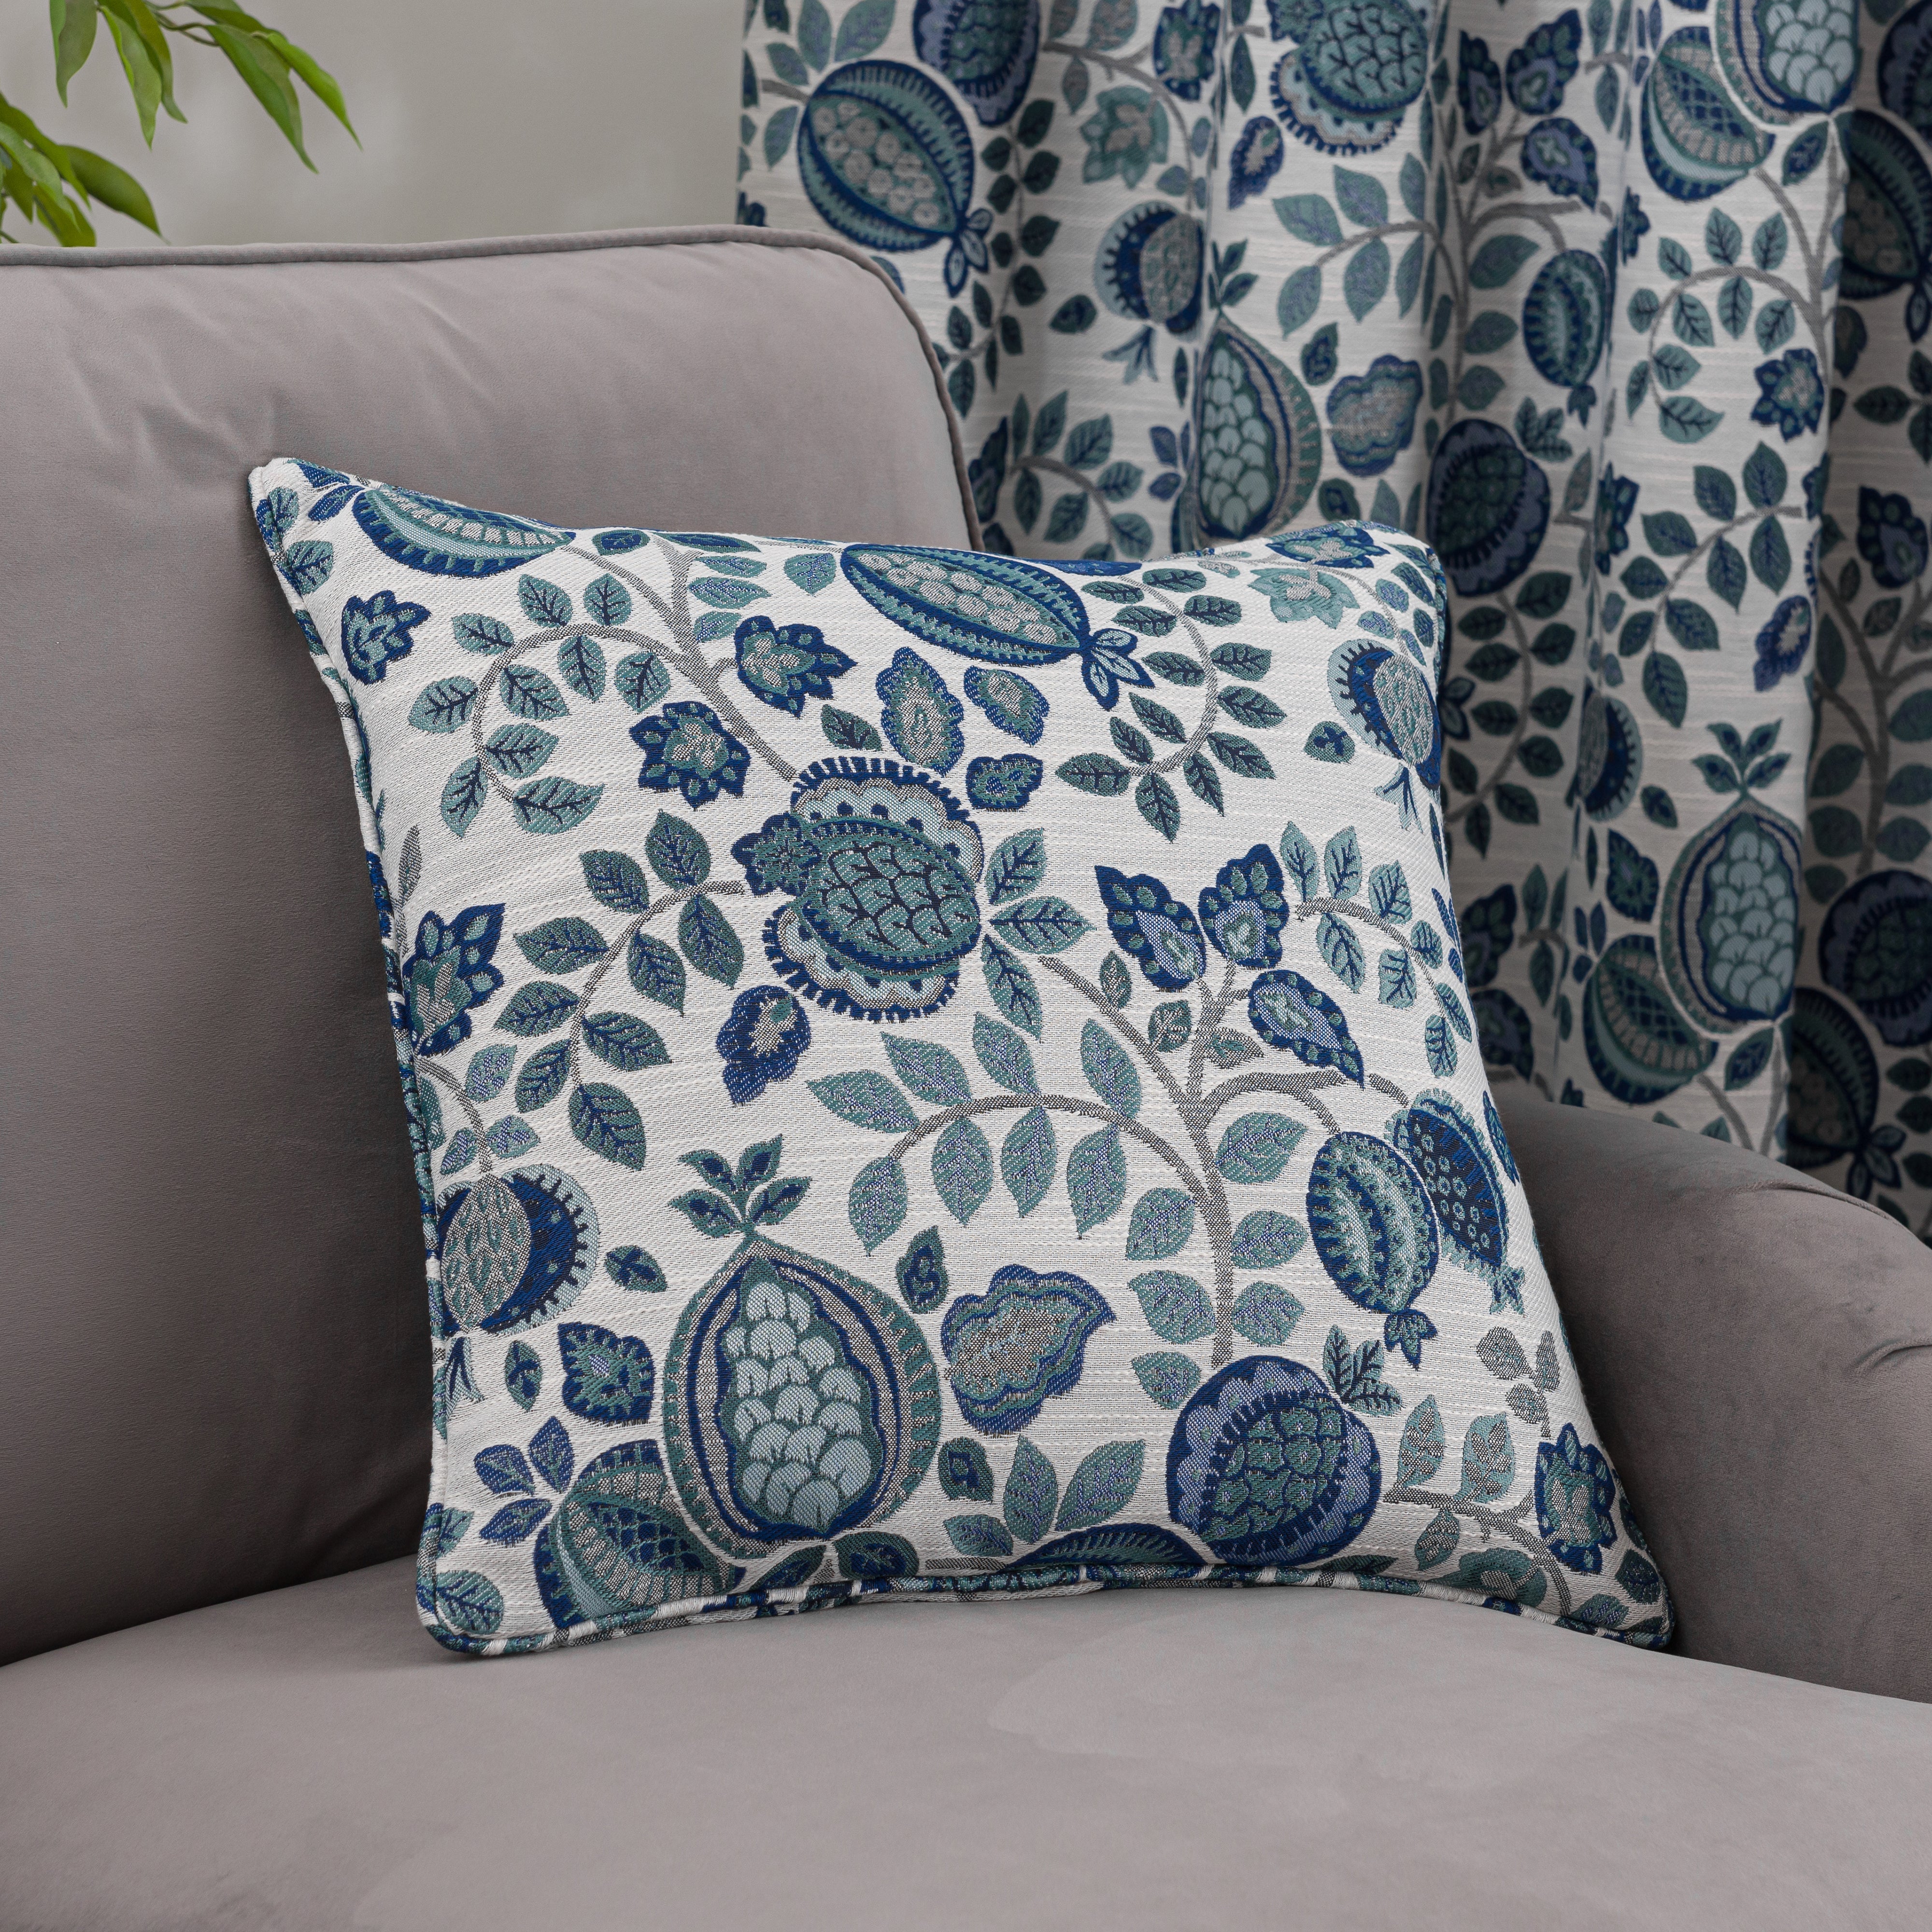 Pomegranate Floral Cushion White And Blue